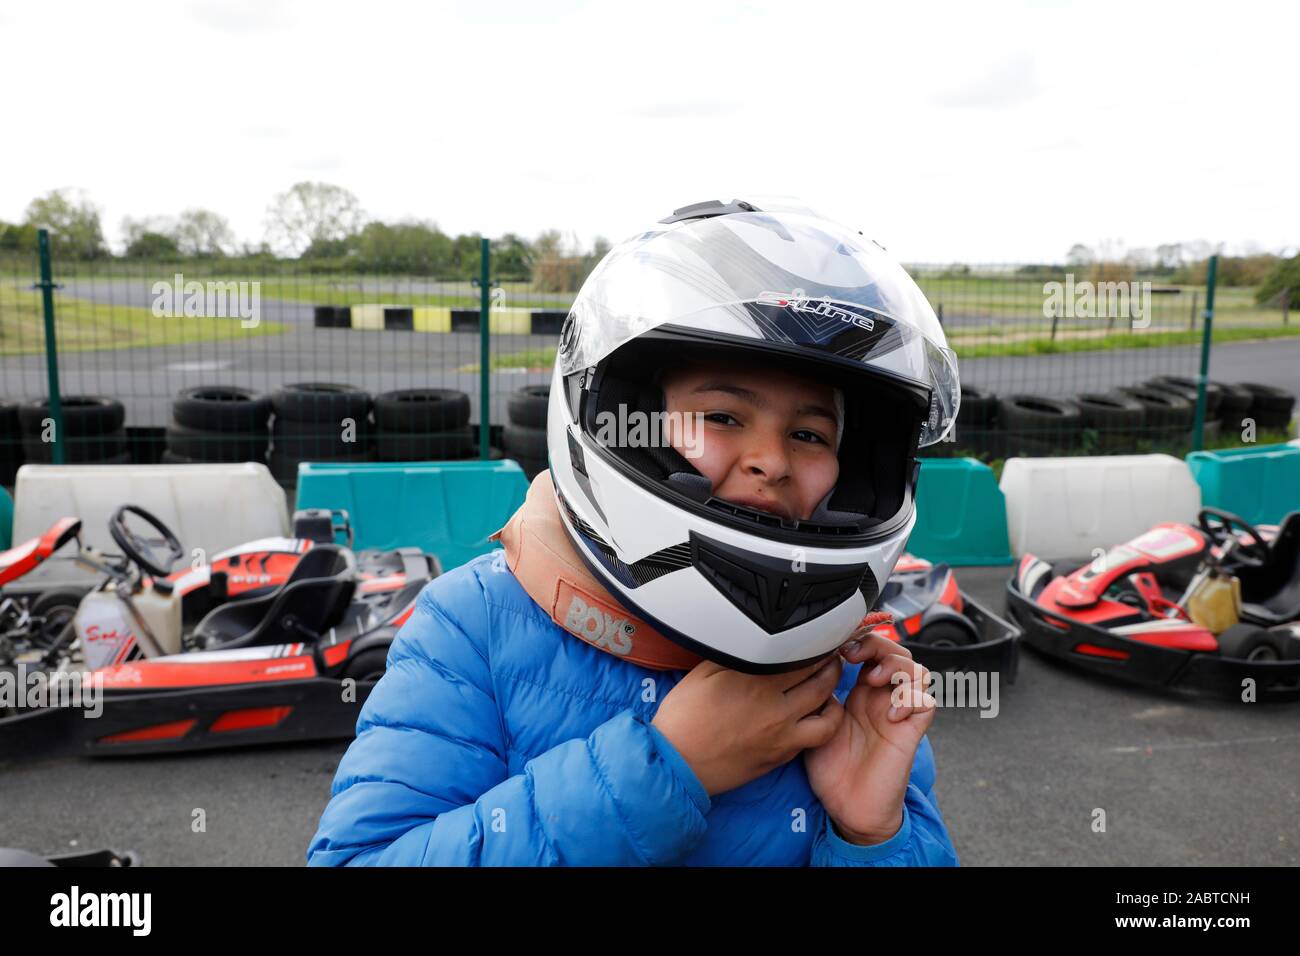 12-Year-Old Boy Taking Off A Helmet After Riding A Go-Kart In Cabourg, France Stock Photo - Alamy